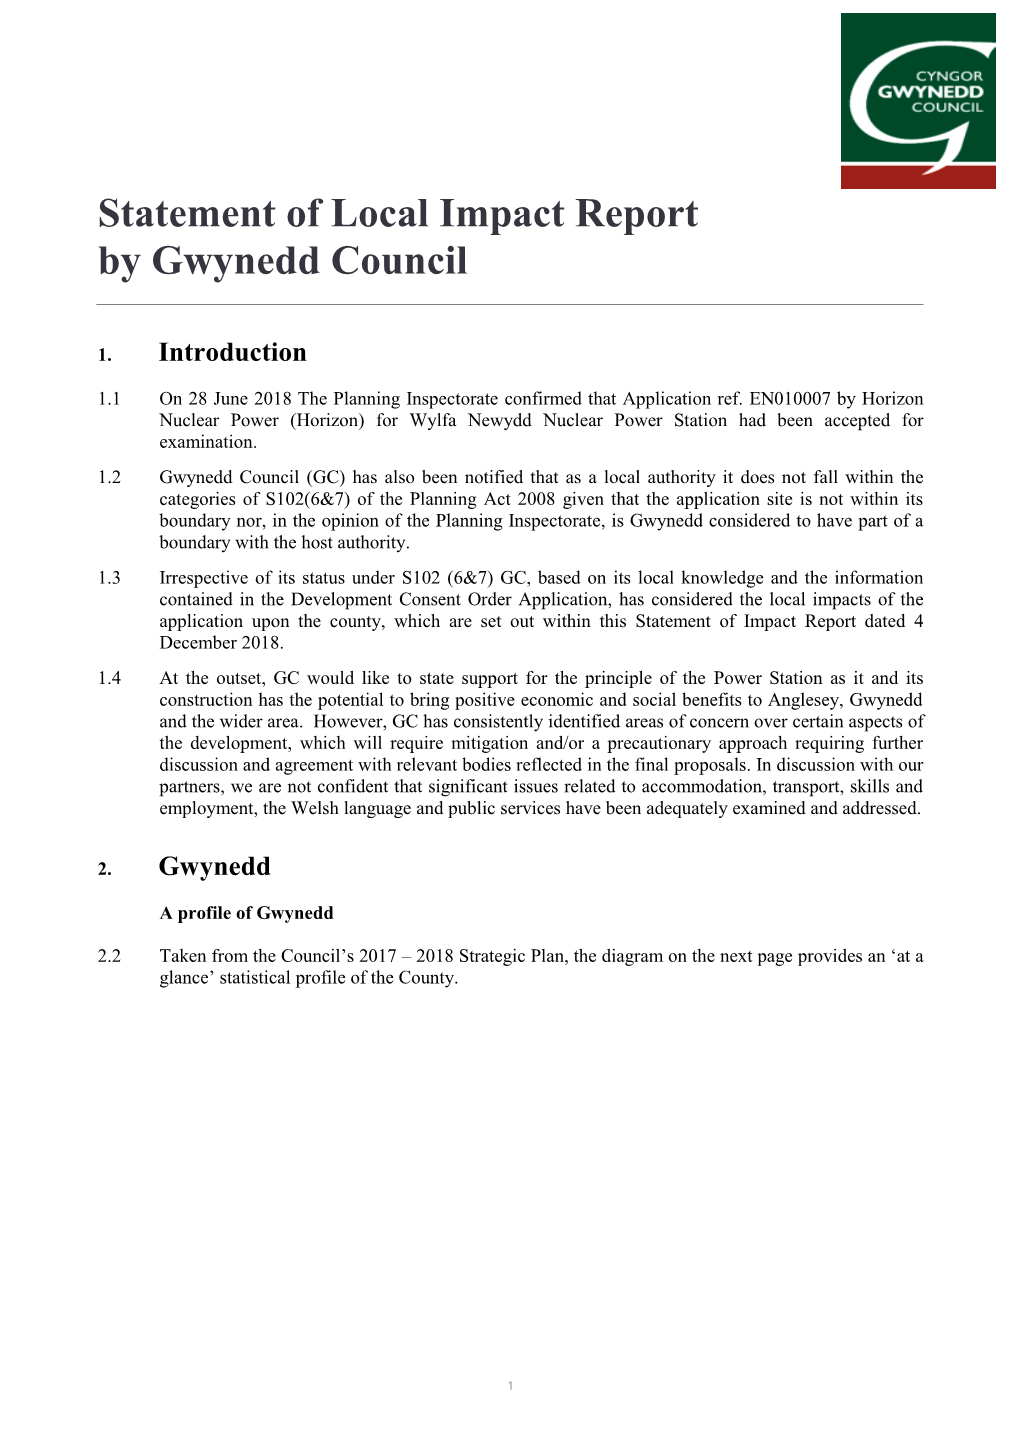 Statement of Local Impact Report by Gwynedd Council